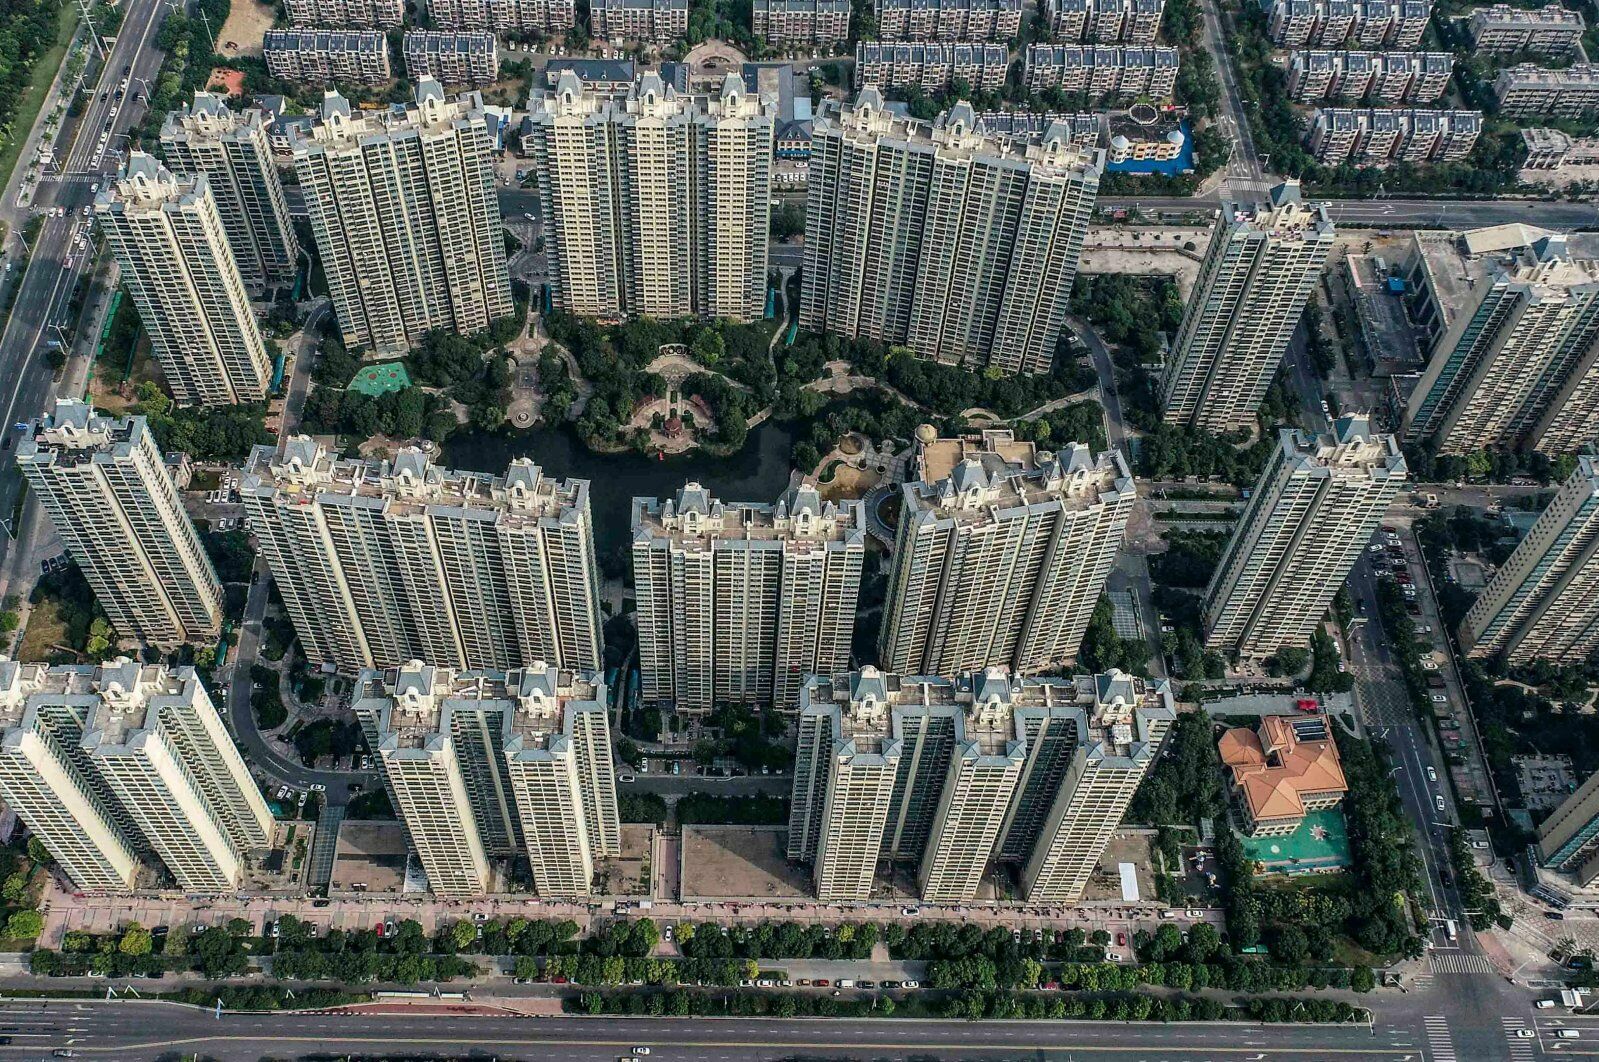 2008 looms over the world: Chinese developer has accumulated 300 billion in debt